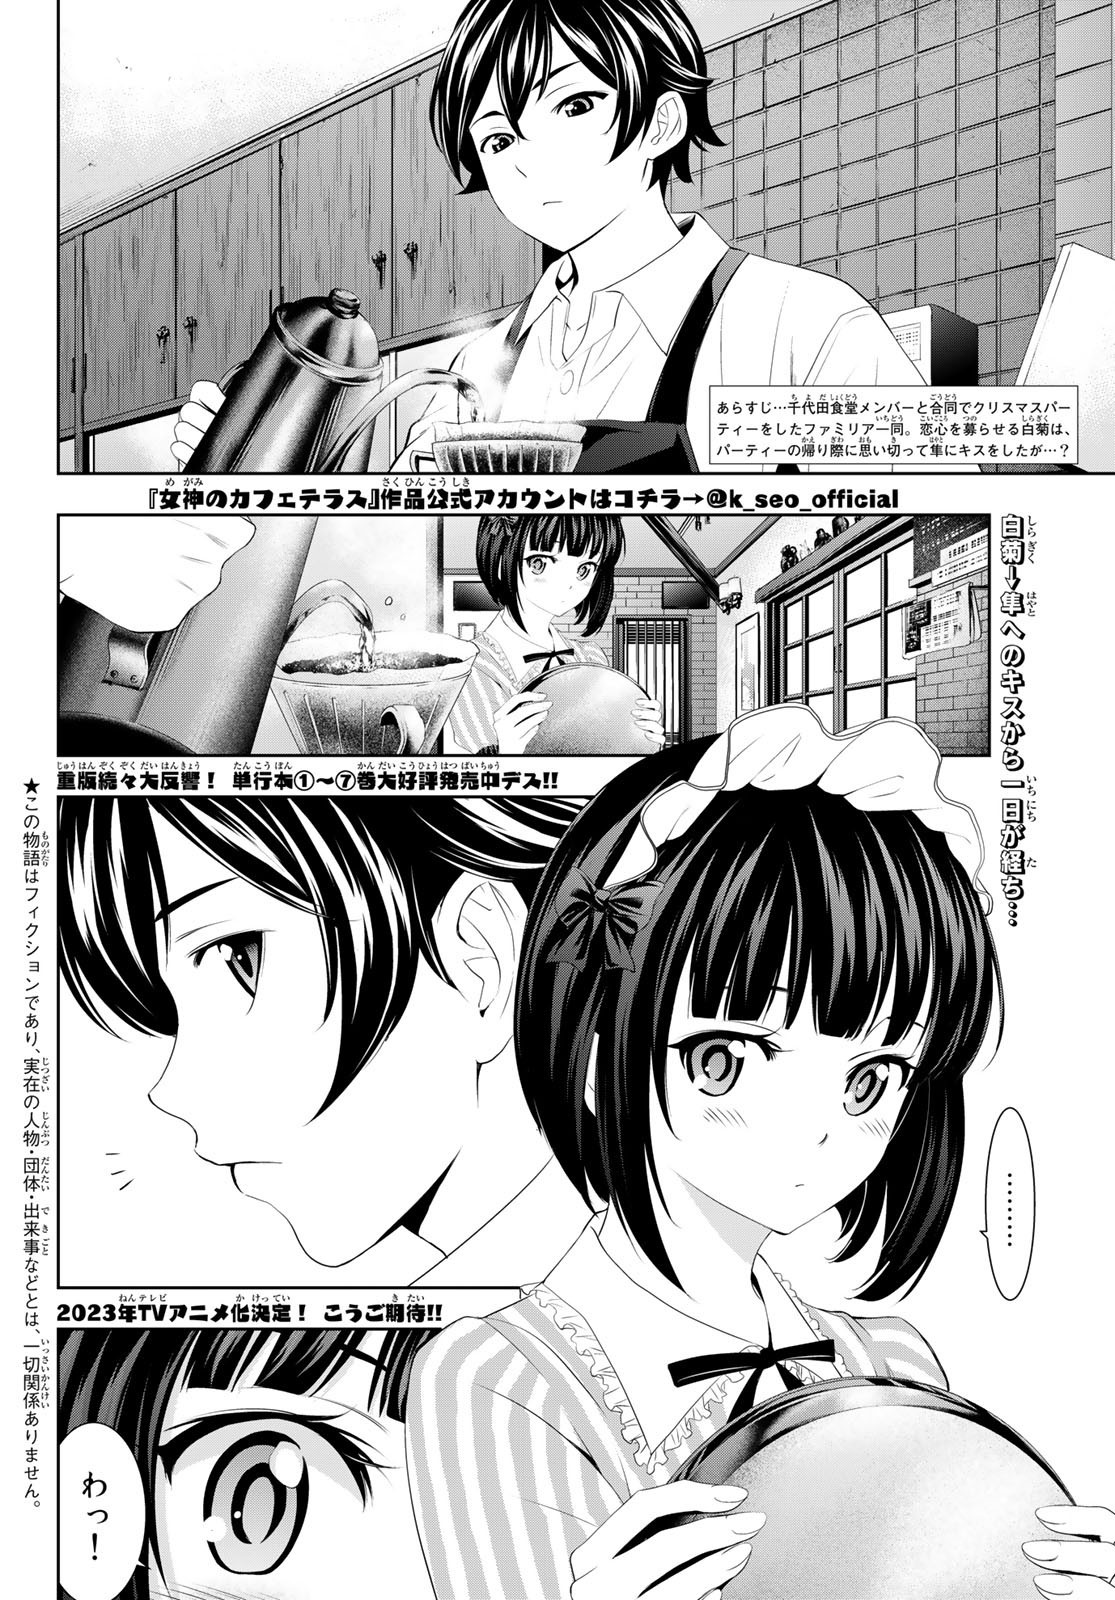 Goddess-Cafe-Terrace - Chapter 078 - Page 2